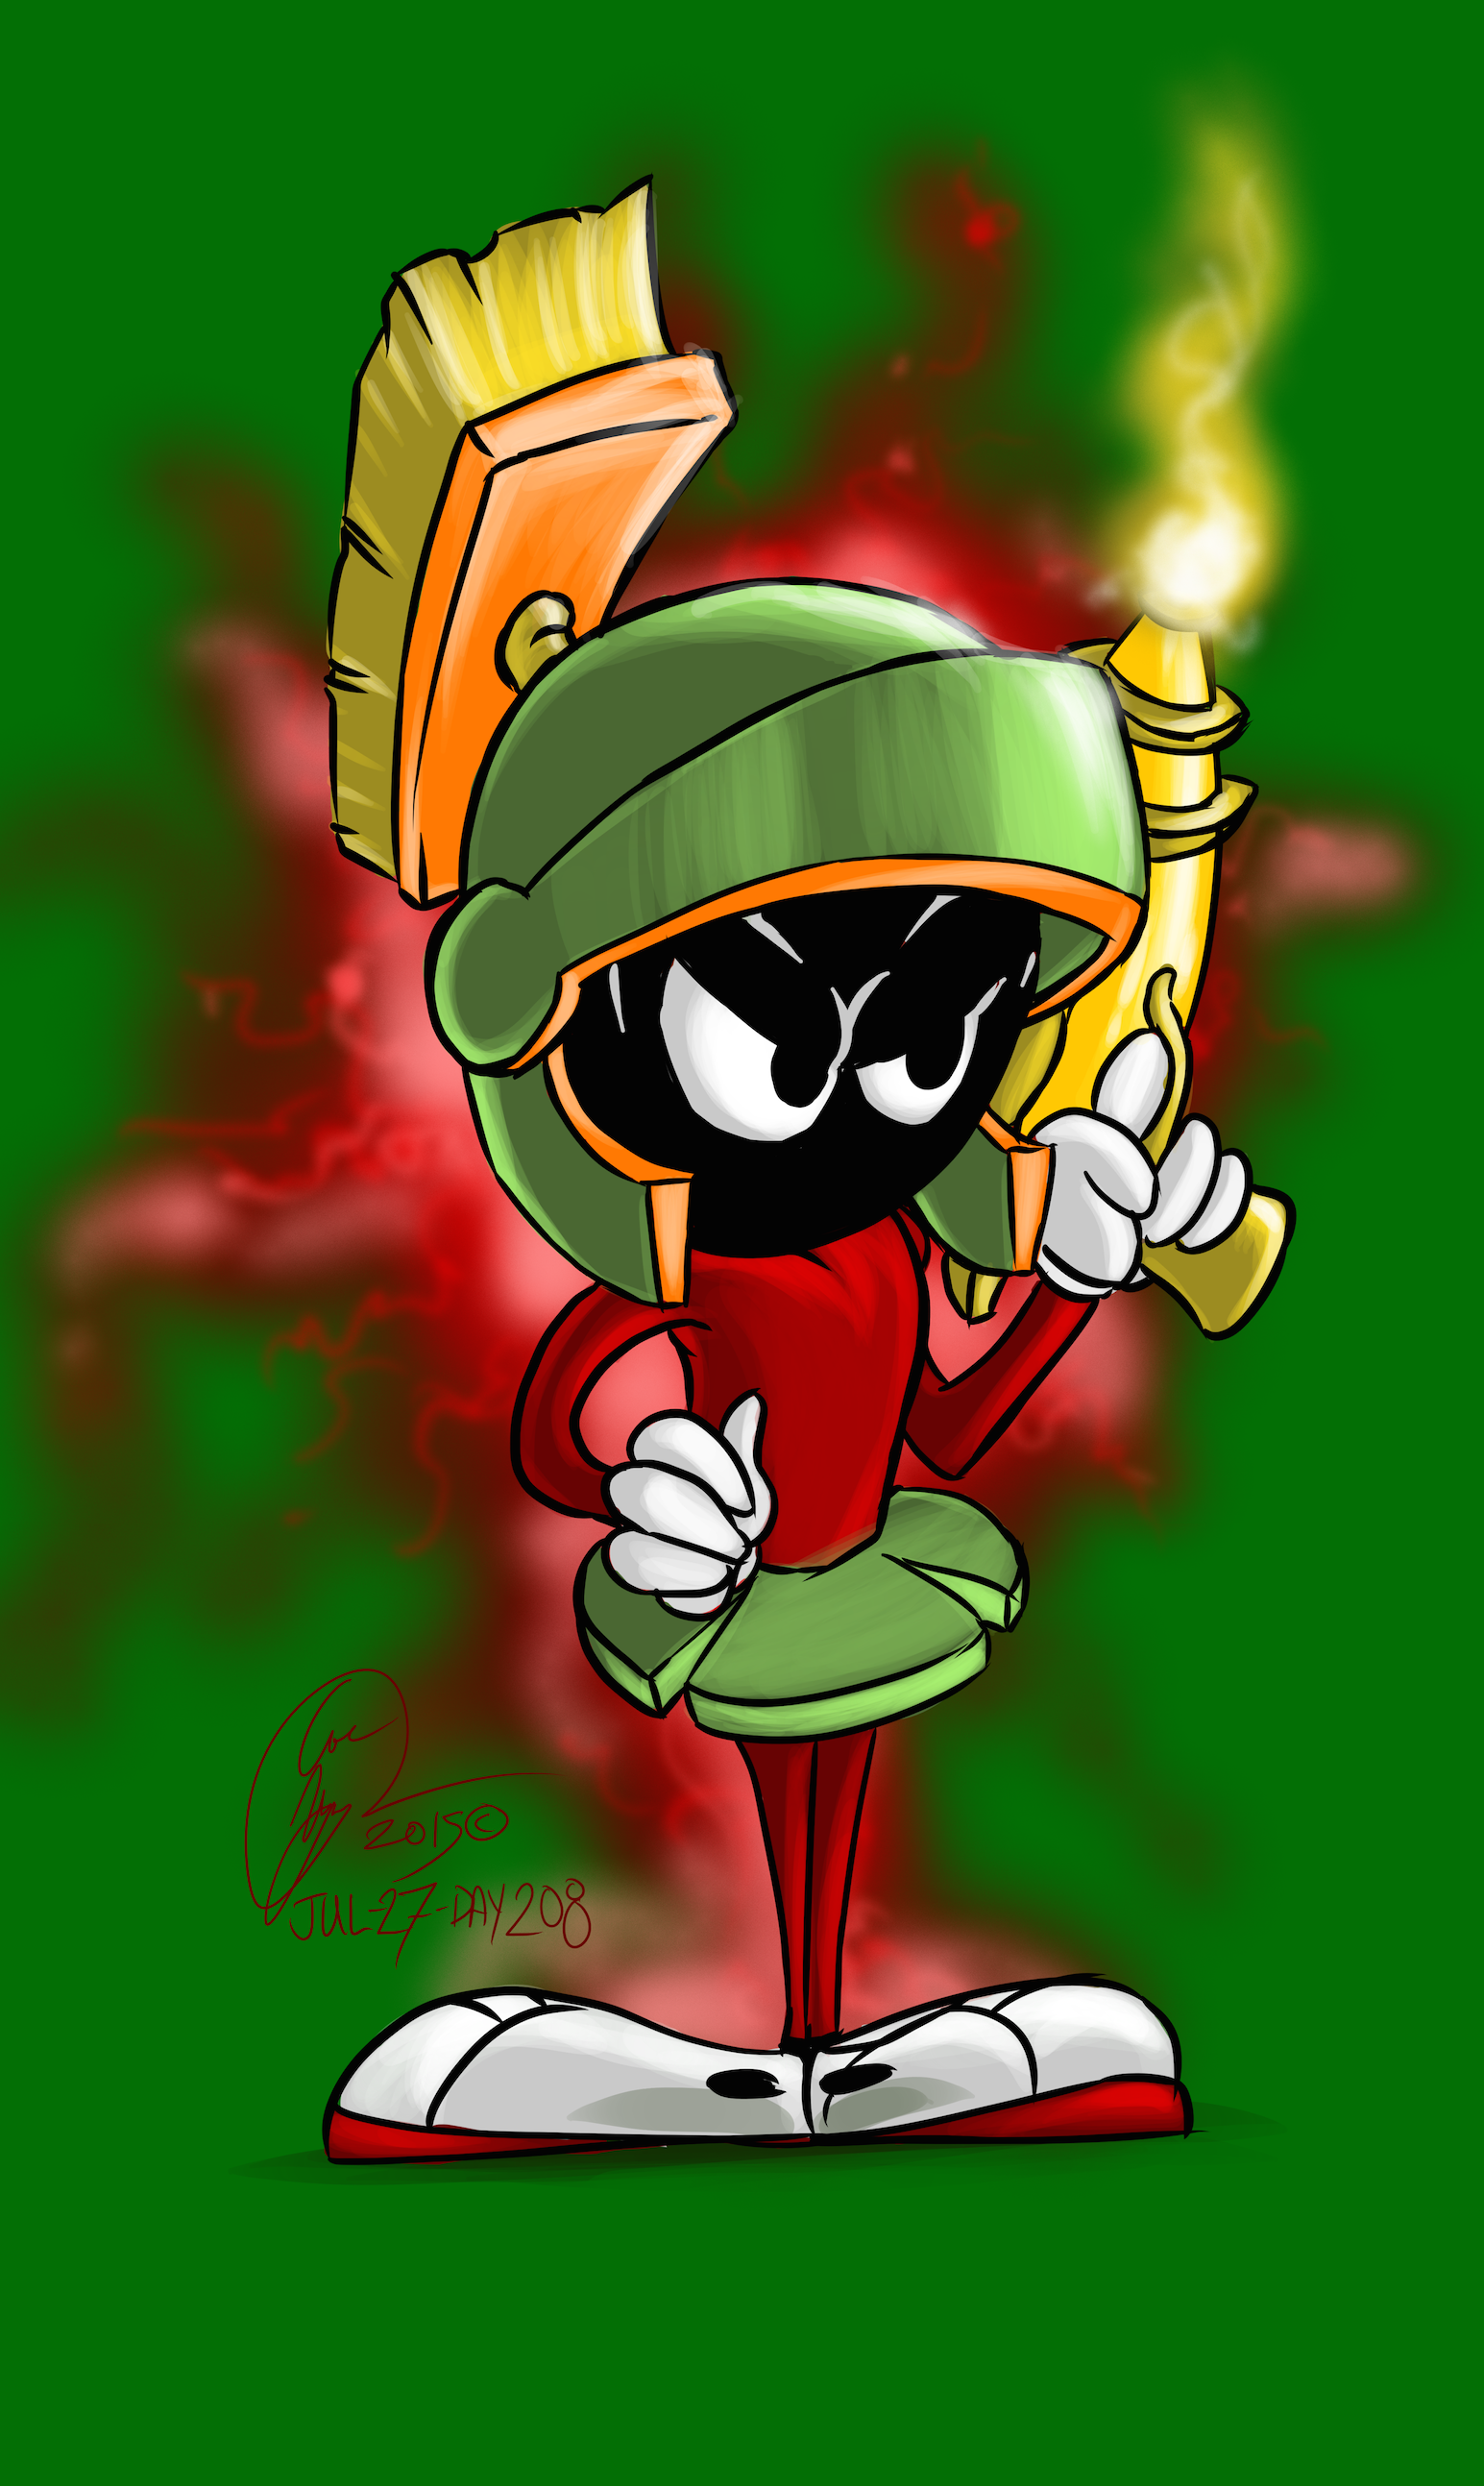 Marvin The Martian wallpaper by Shianne70  Download on ZEDGE  3c77